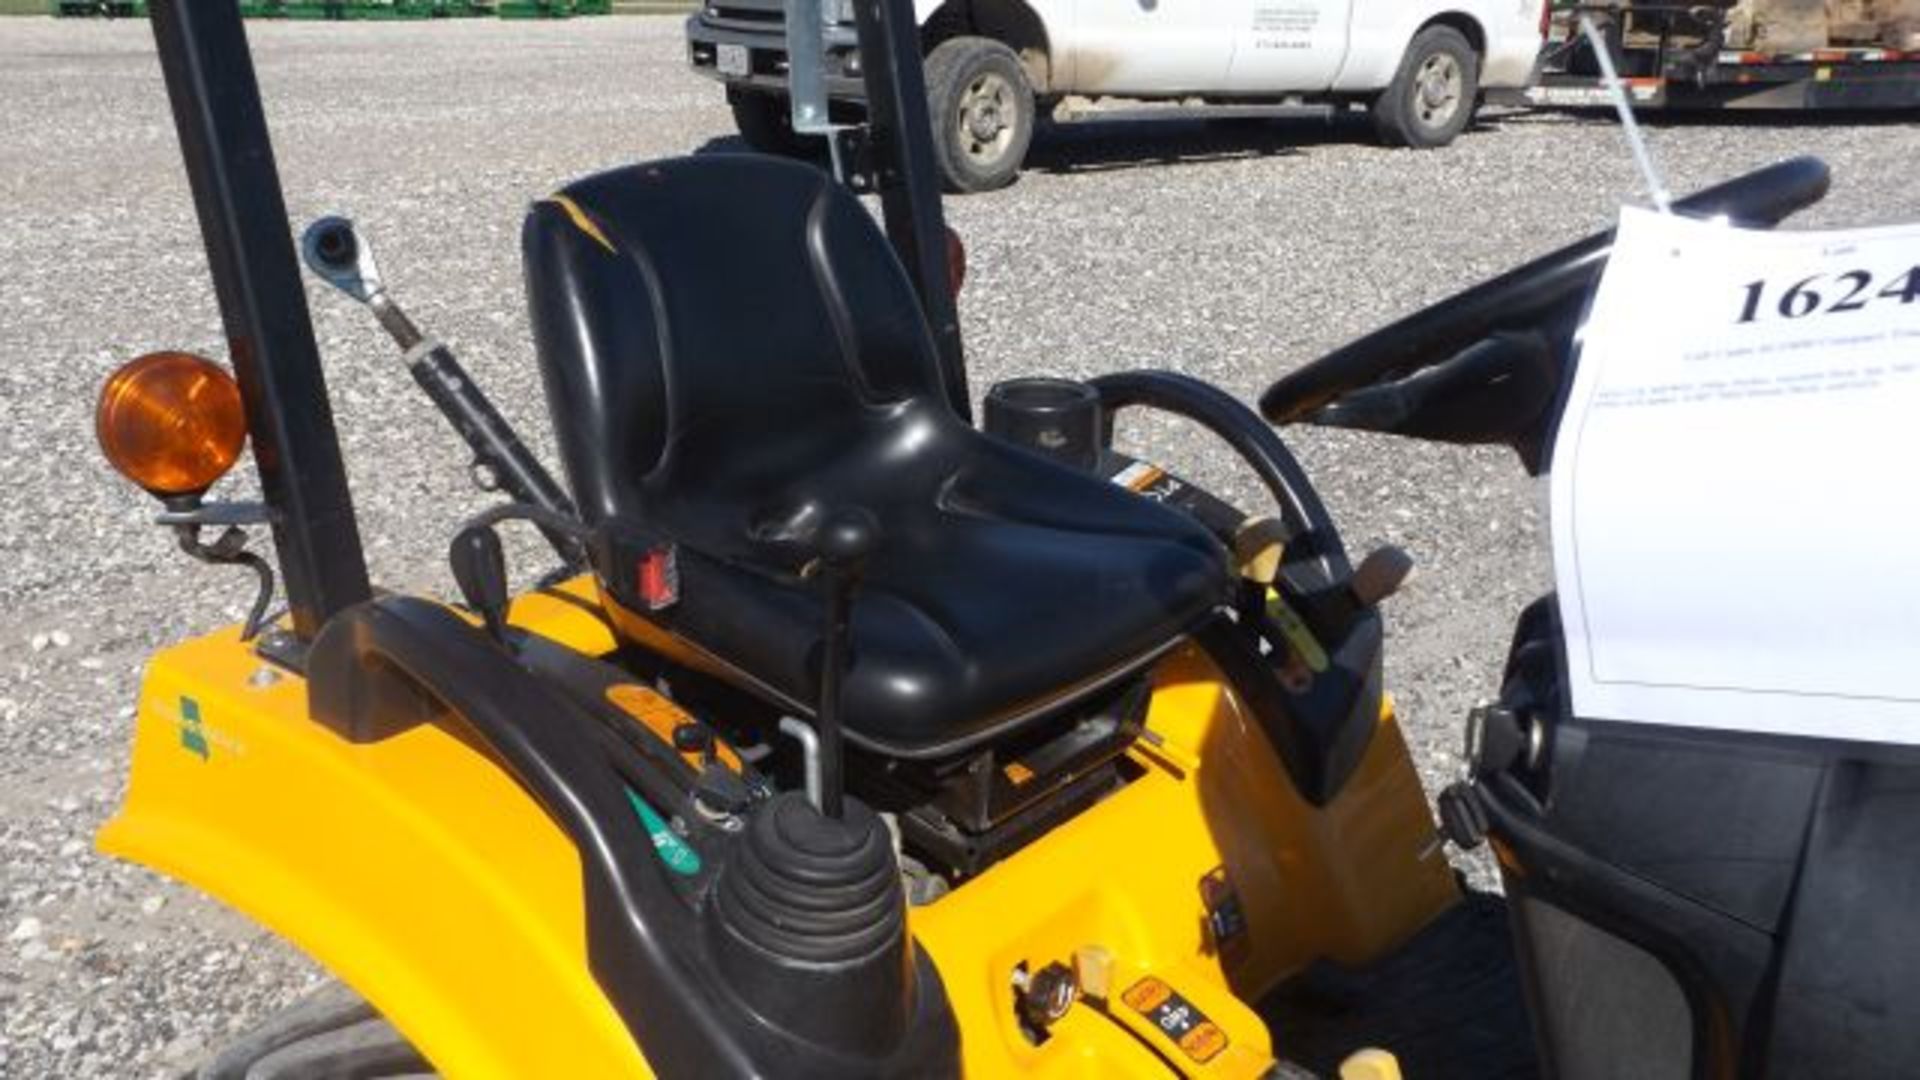 Cub Cadet SC2400 Compact Tractor #F61119, 334 hrs, MFWD, 24hp, Hydro, Joystick Hyd, 3pt, 540 Rear - Image 3 of 3